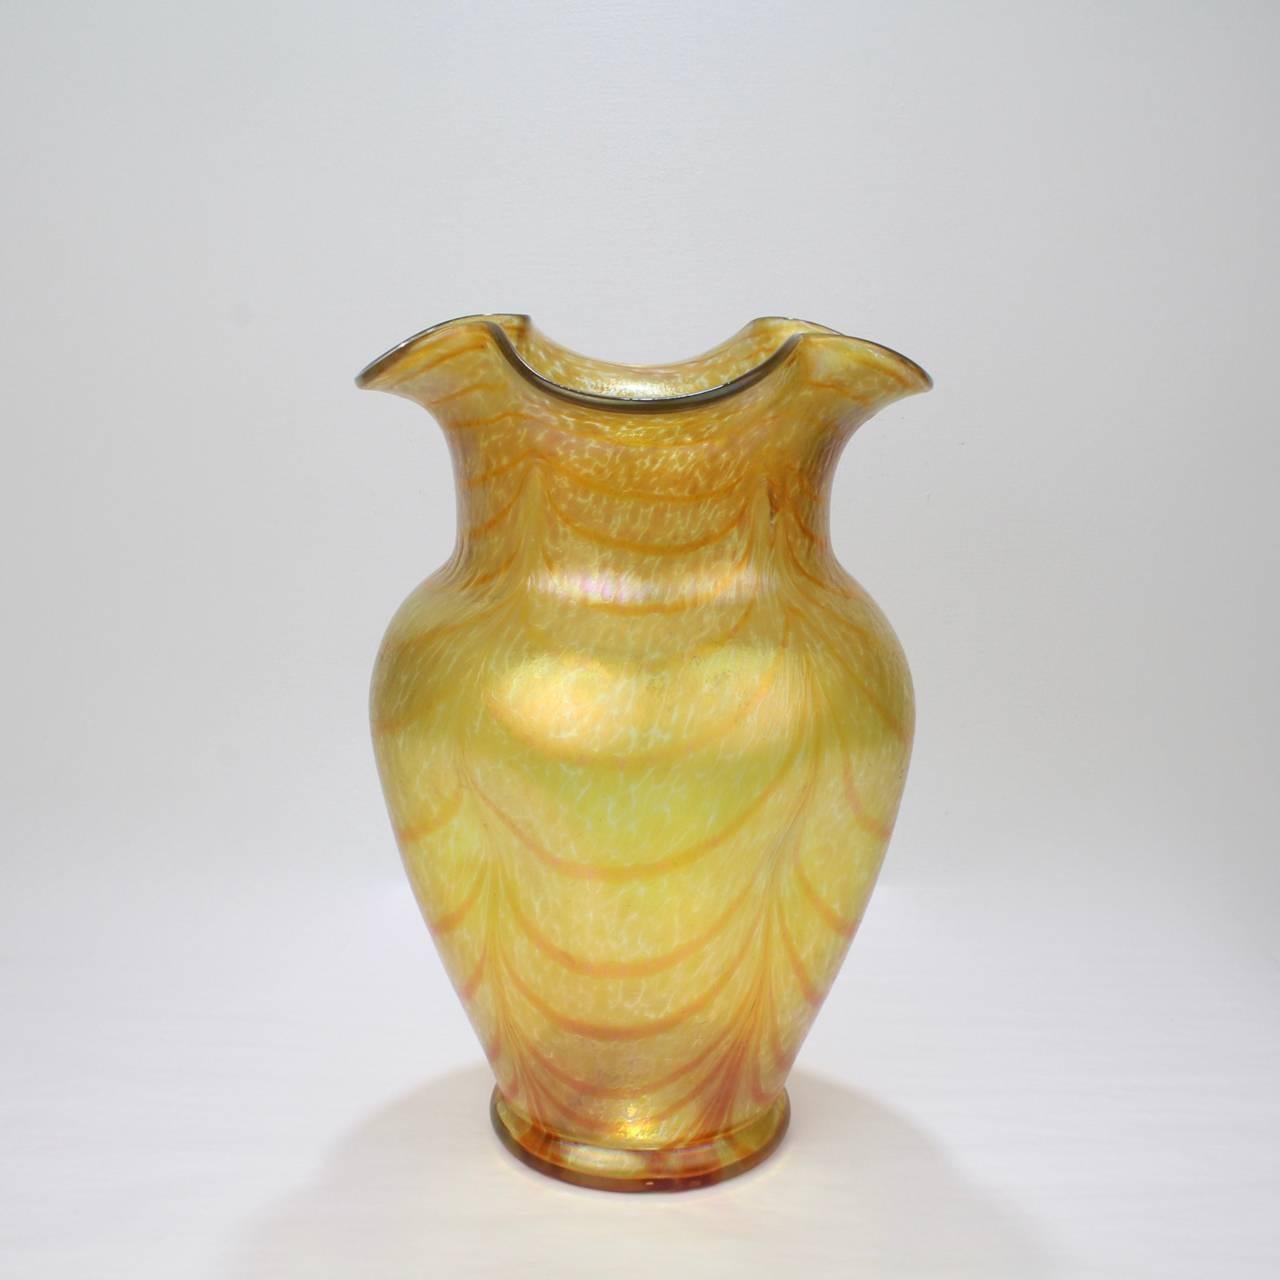 A very large gold and orange iridescent Art Nouveau art glass vase designed by Otto Thamm for the Fritz Heckert Glass Manufactory.

Prior to 2014, this pattern was thought to be silberband by Kralik. Thanks to scholarship by Volkmar Schordt, we